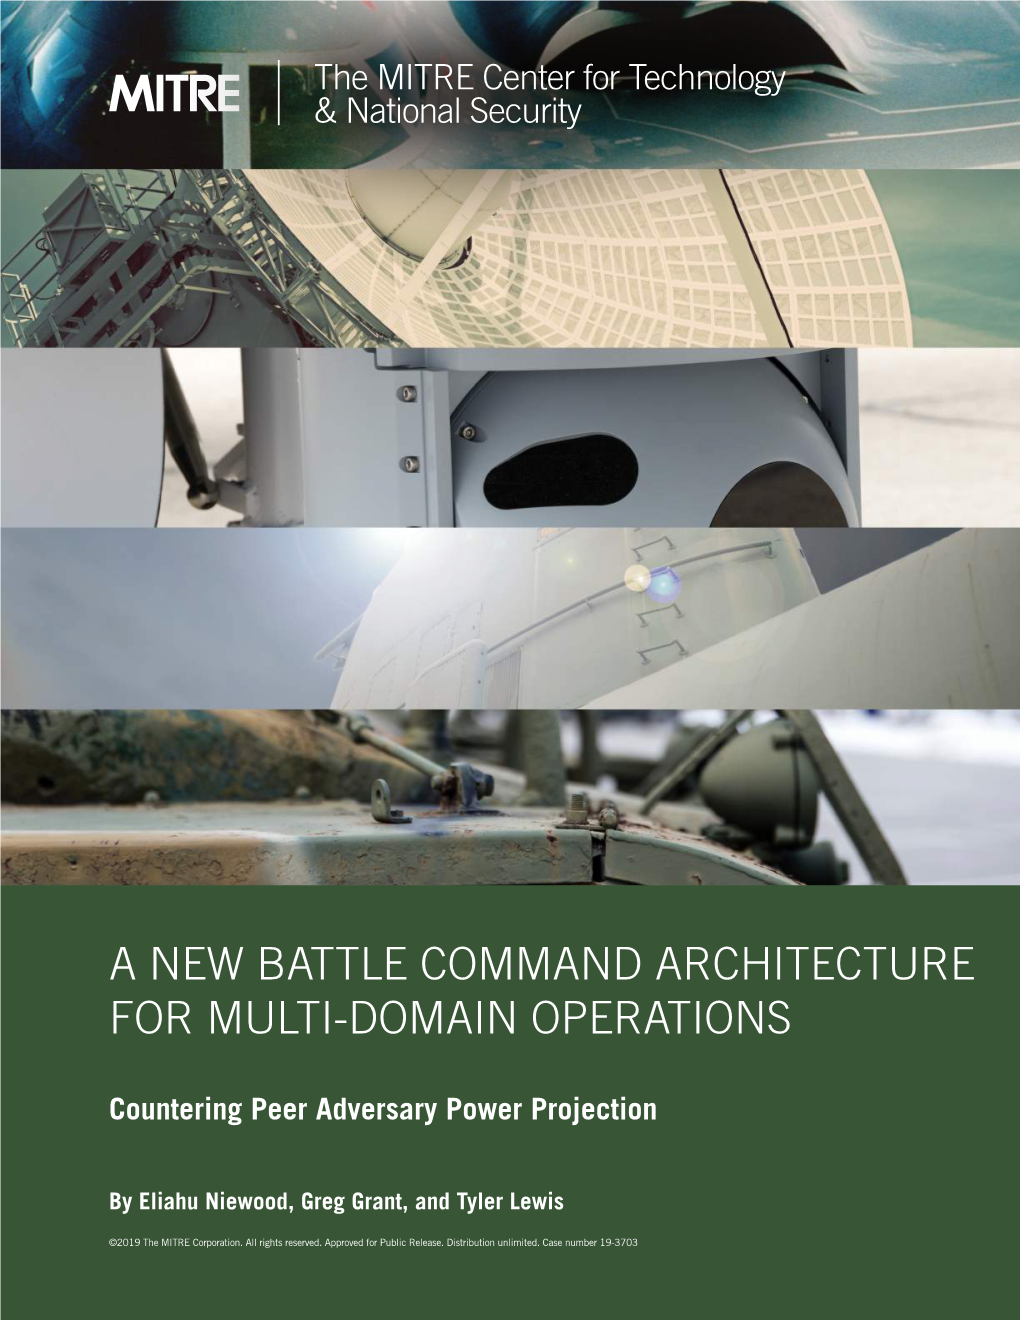 A New Battle Command Architecture for Multi-Domain Operations